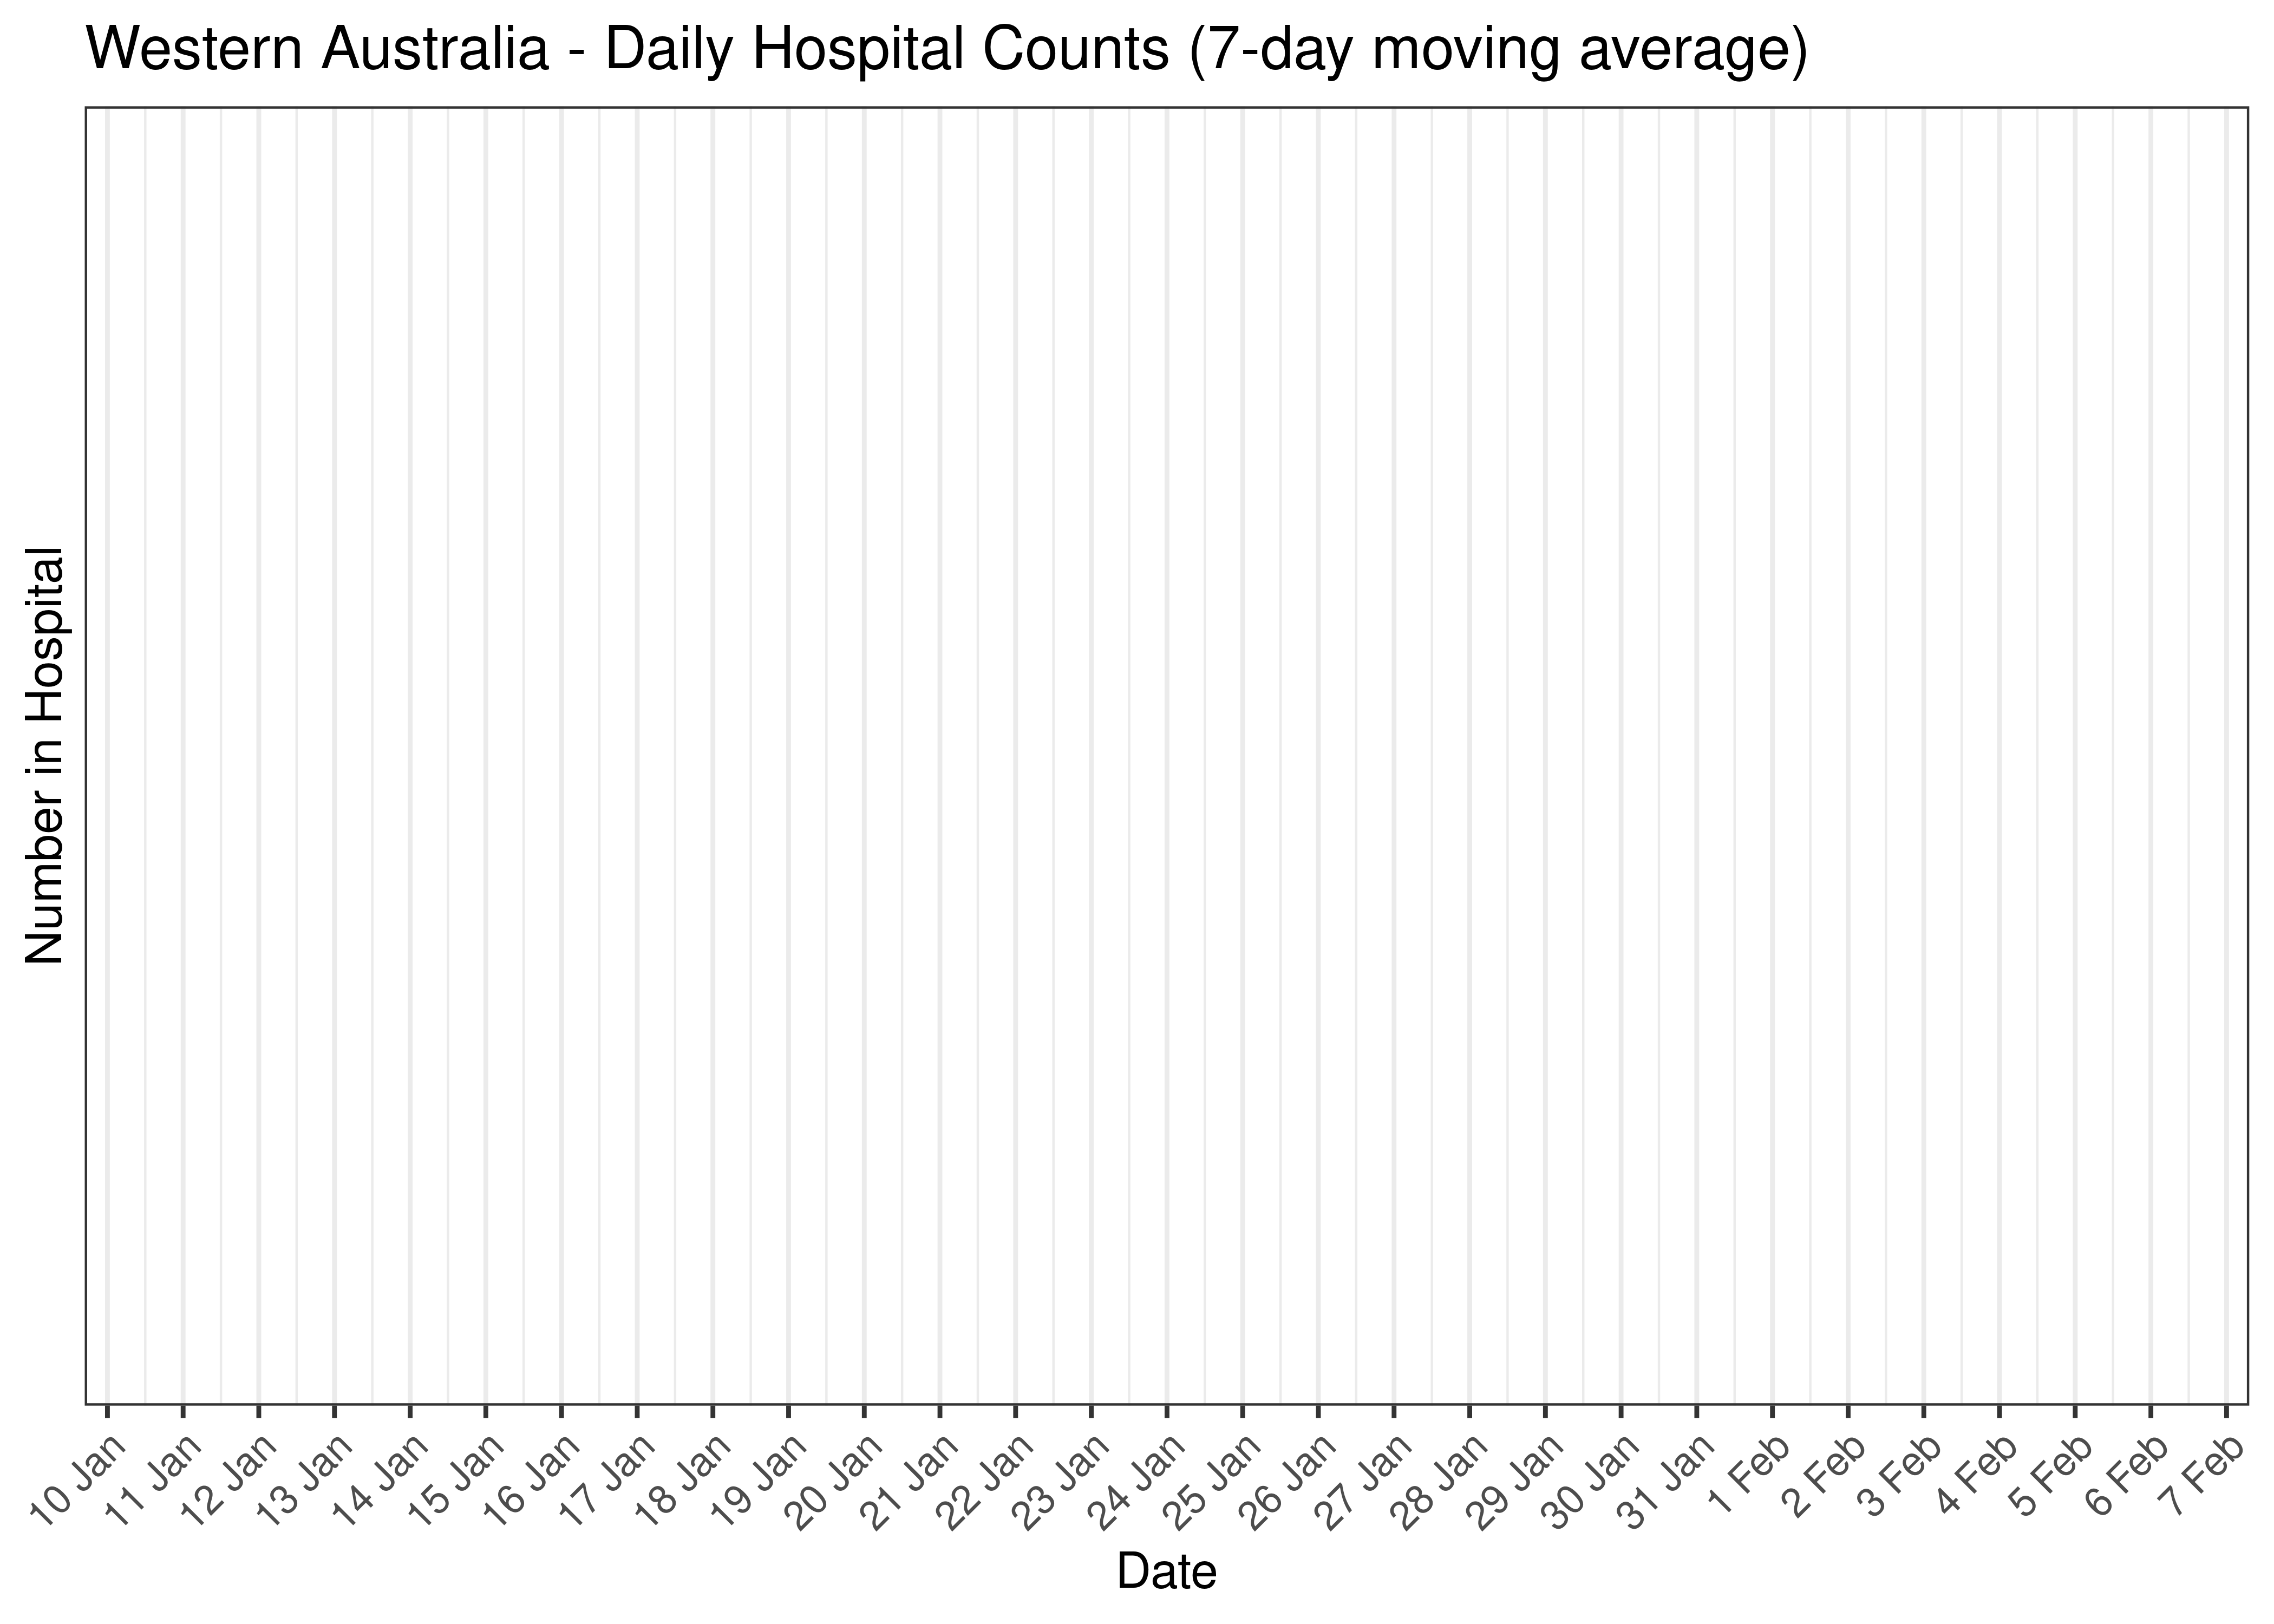 Victoria - Daily Deaths for Last 30-days (7-day moving average)